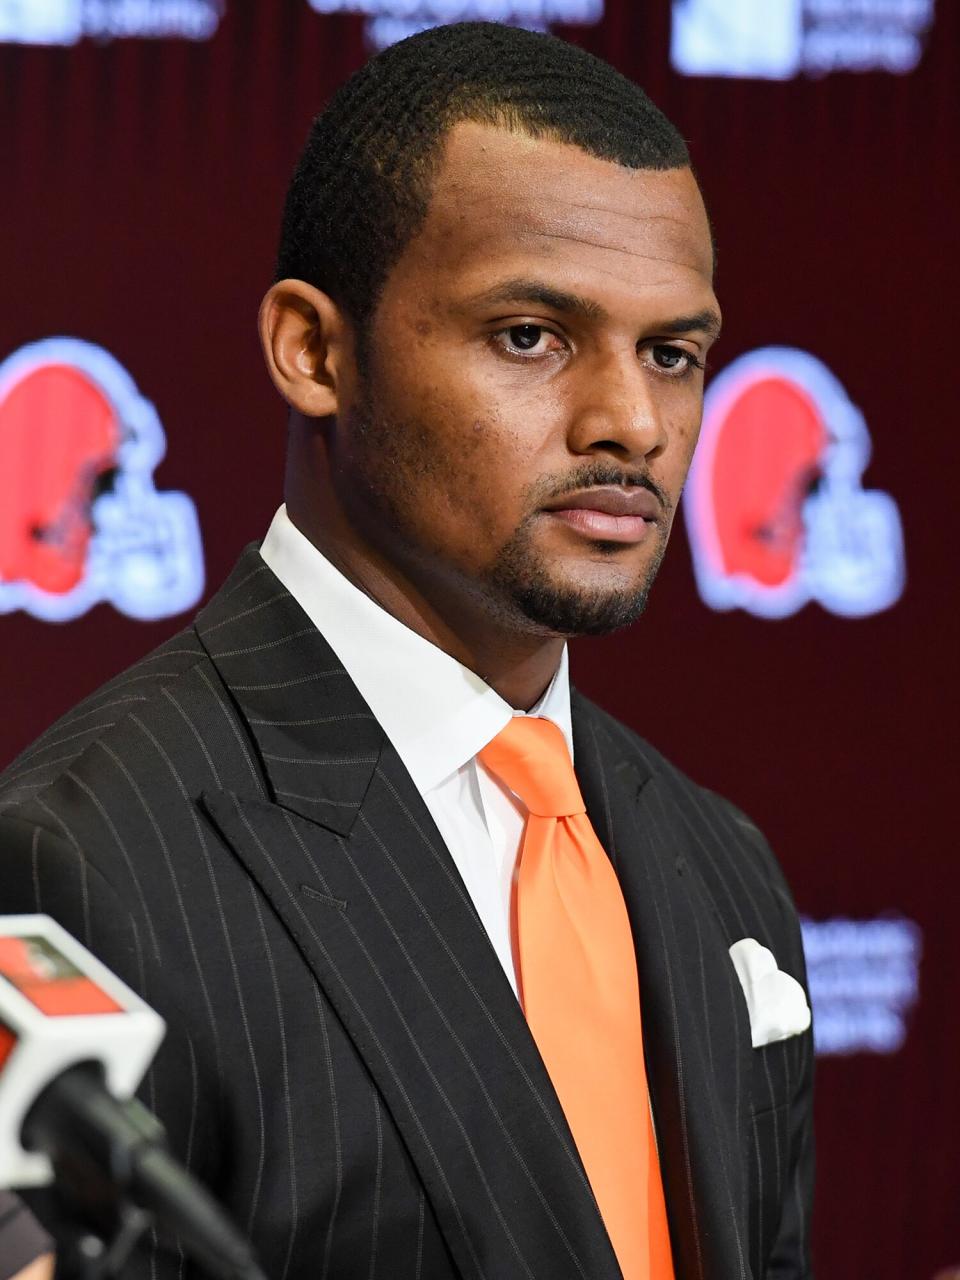 Deshaun Watson of the Cleveland Browns listens to questions during a press conference introducing him to the Cleveland Browns at CrossCountry Mortgage Campus on March 25, 2022 in Berea, Ohio